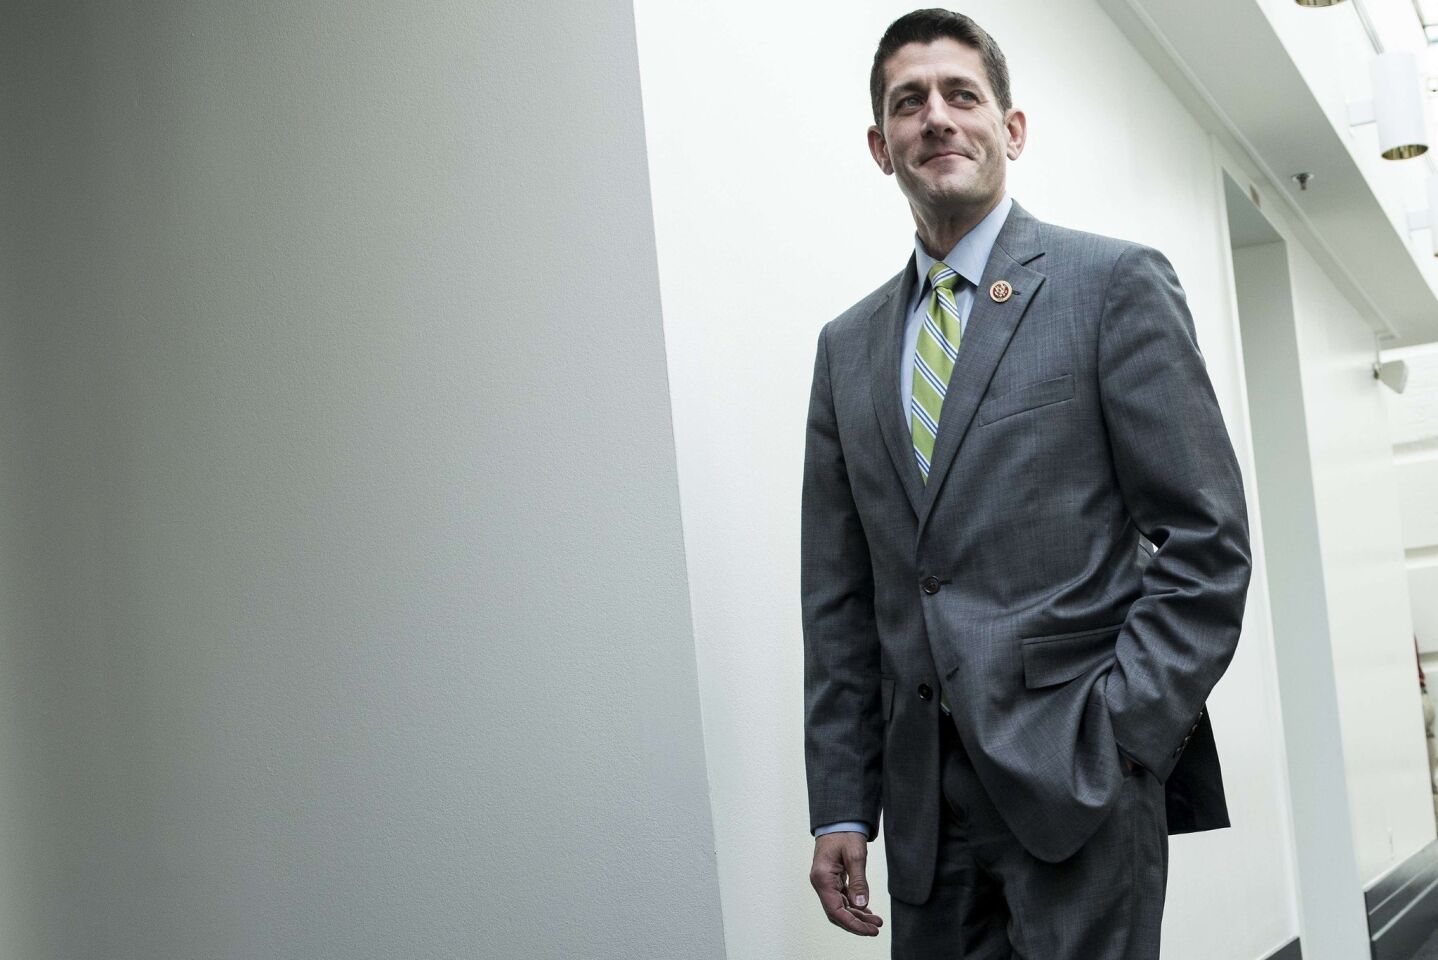 Mitt Romney's running mate in 2012, Rep. Paul Ryan (R-Wis.), has built a reputation on budgetary issues. Ryan didn't walk away from 2012 unscathed, but carries clout as the House Budget Committee chairman.